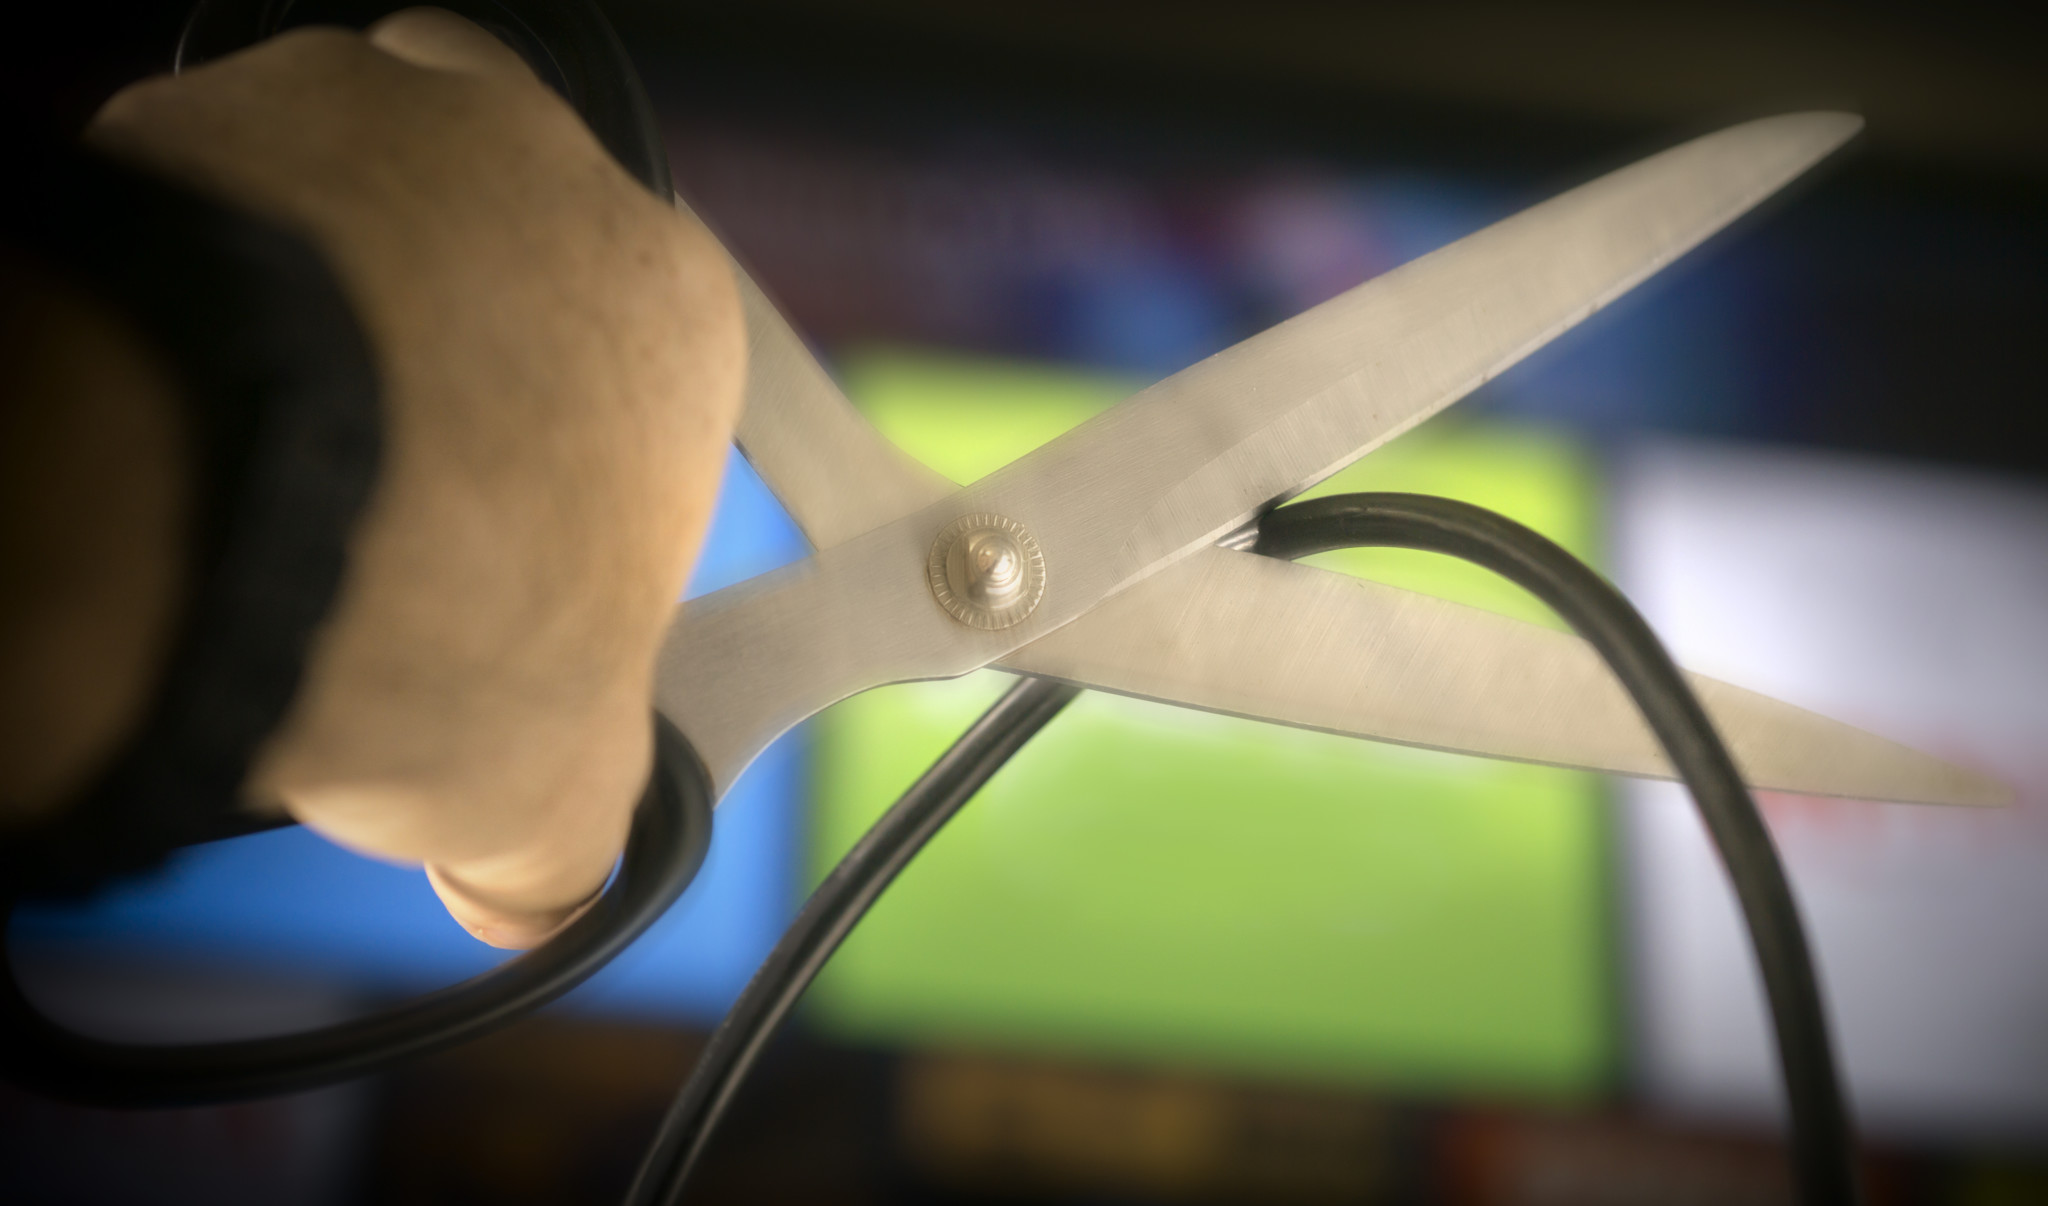 Cord Cutting This Week Podcast #7 – IPTV Lawsuits, AT&T DISH, 5G, Amazon, & More